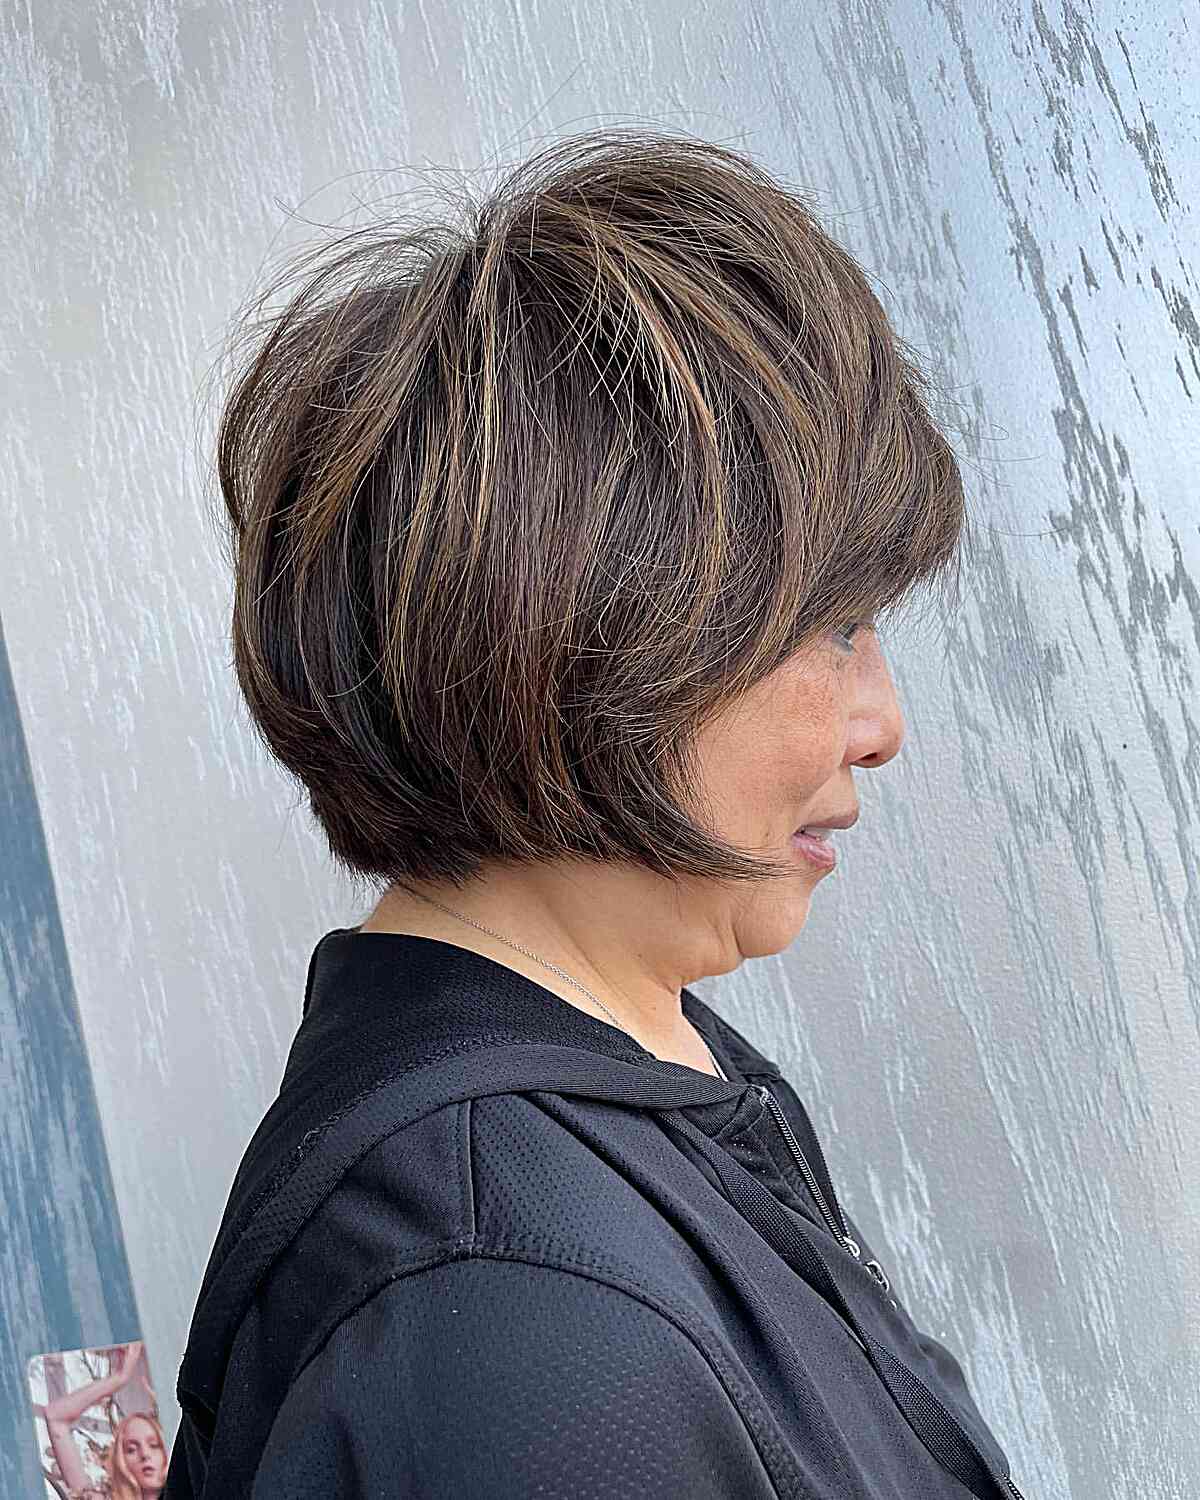 Jaw-Length Straight Shaggy Bob with Crown Layers for Mature Women Over 60 with Bronde Hair